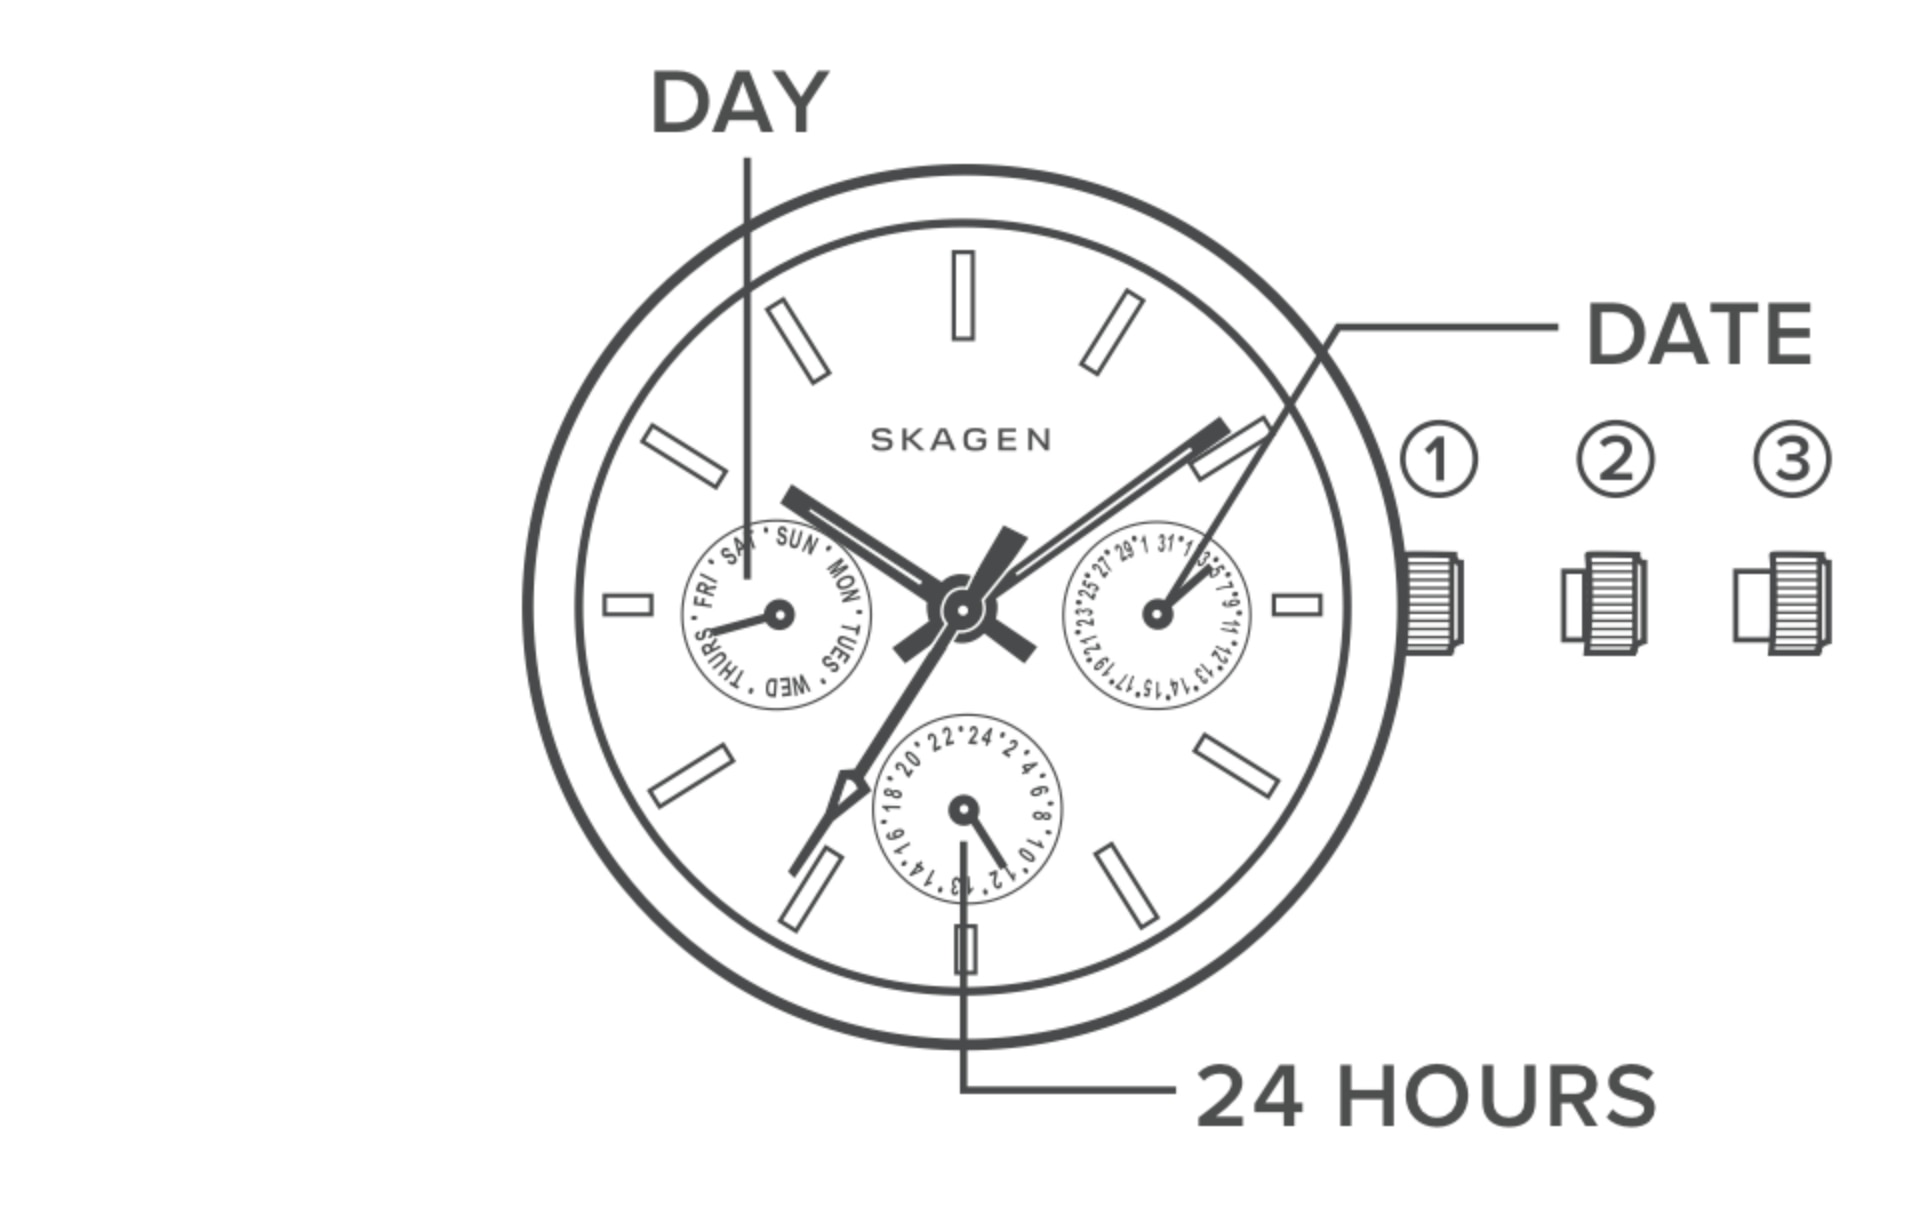 line art of a multifunction watch dial, identifying the crown, day, date and 24 hour hand.